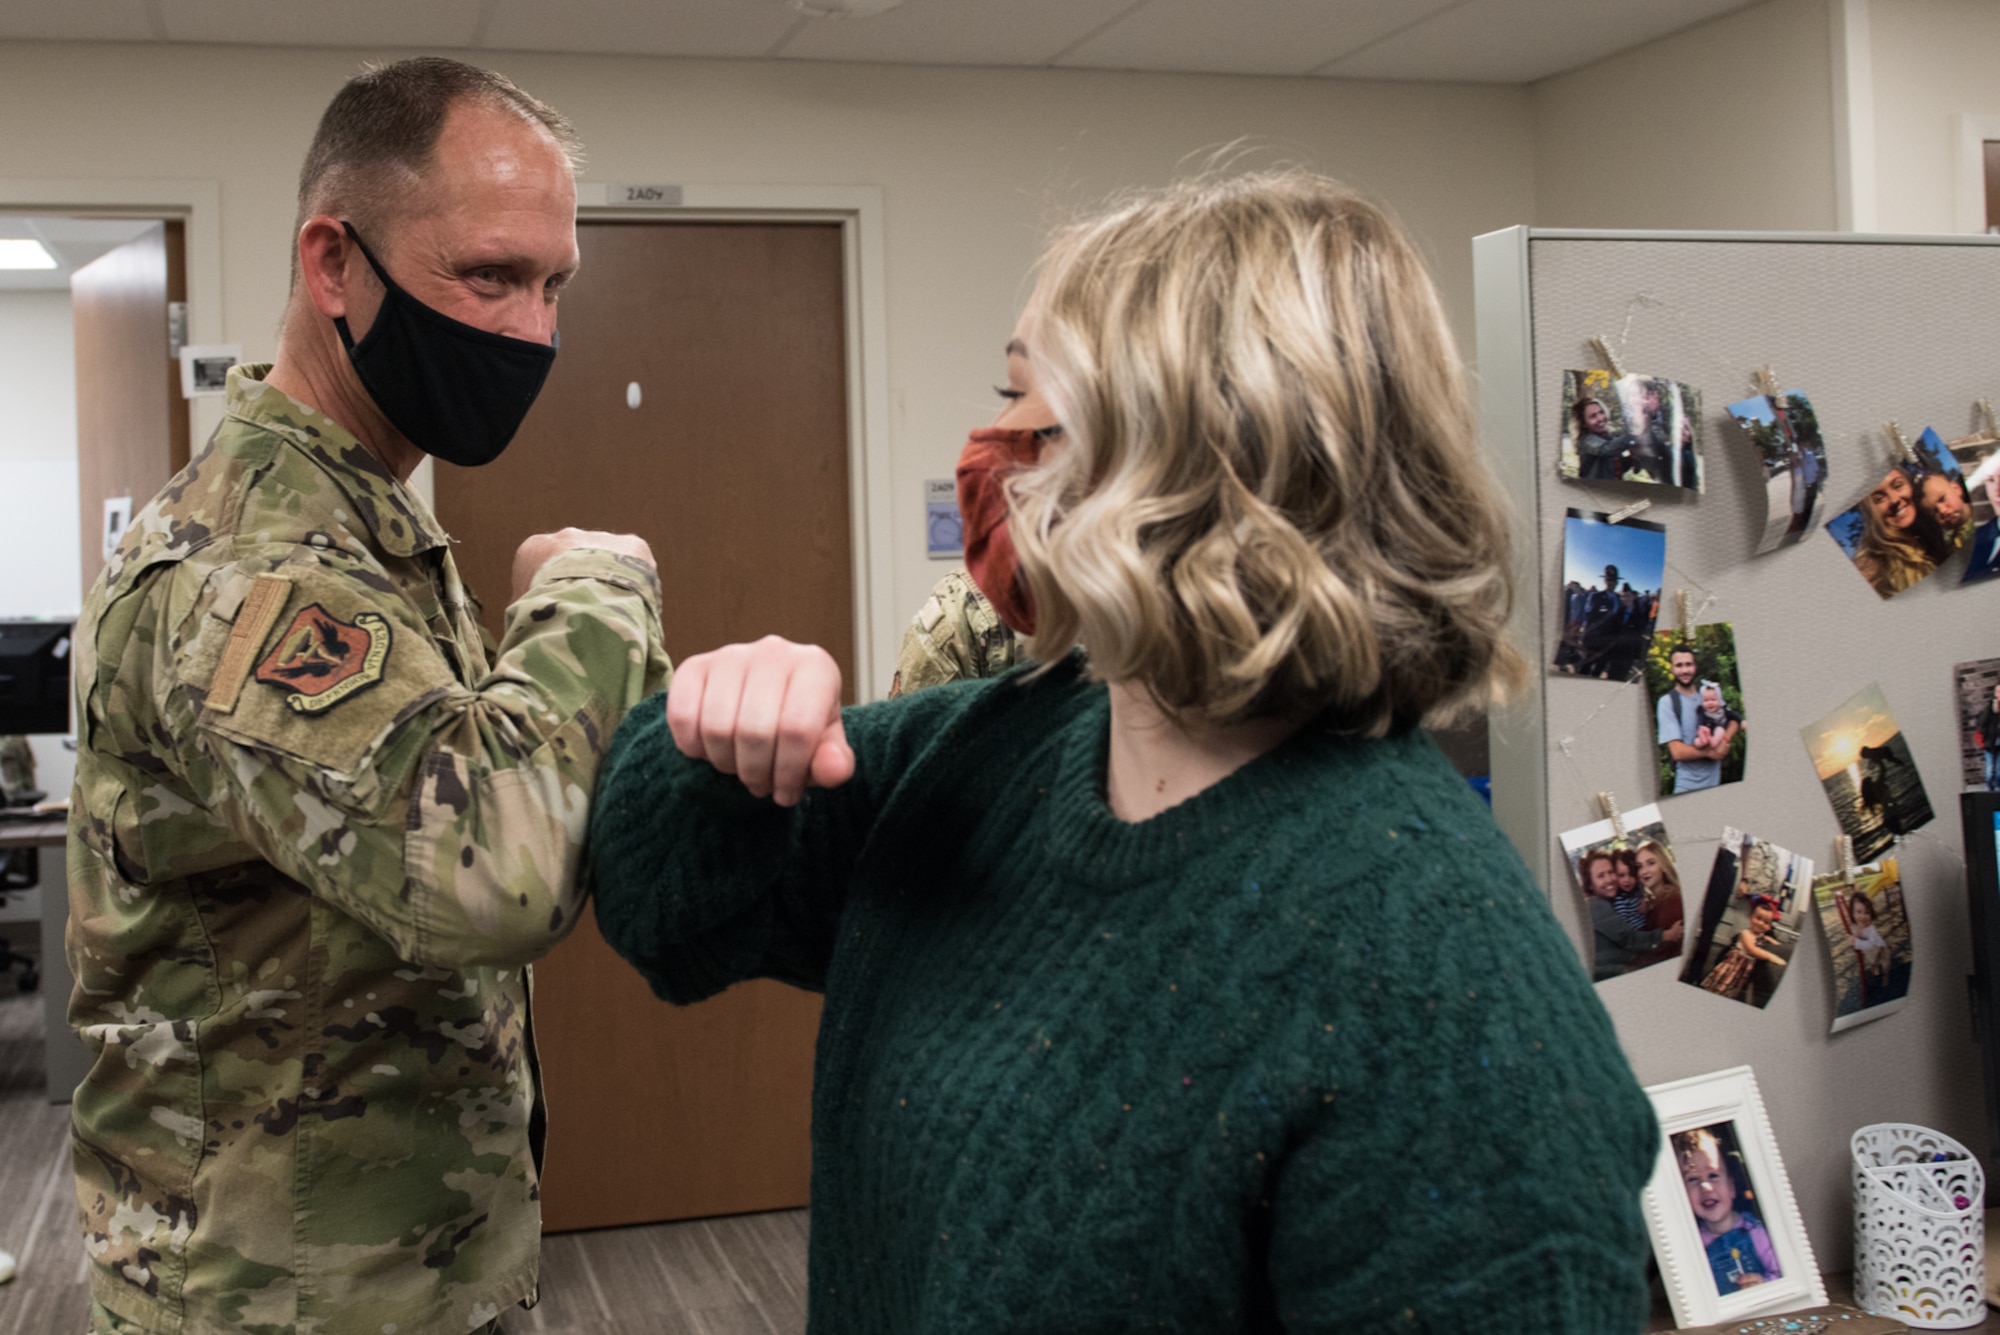 U.S. Air Force Chief Master Sgt. Jason Hodges, 509th command chief, thanks Airman Haley Moore, 509th Medical Group public health technician, for her hard work this past year at Whiteman Air Force Base, Missouri, Dec. 18, 2020. The 509th MDG created innovative ways to stay safe and healthy, in adherence to COVID-19 restrictions, from curbside pharmacy delivery to telehealth services. (U.S. Air Force photo by Airman 1st Class Christina Carter)